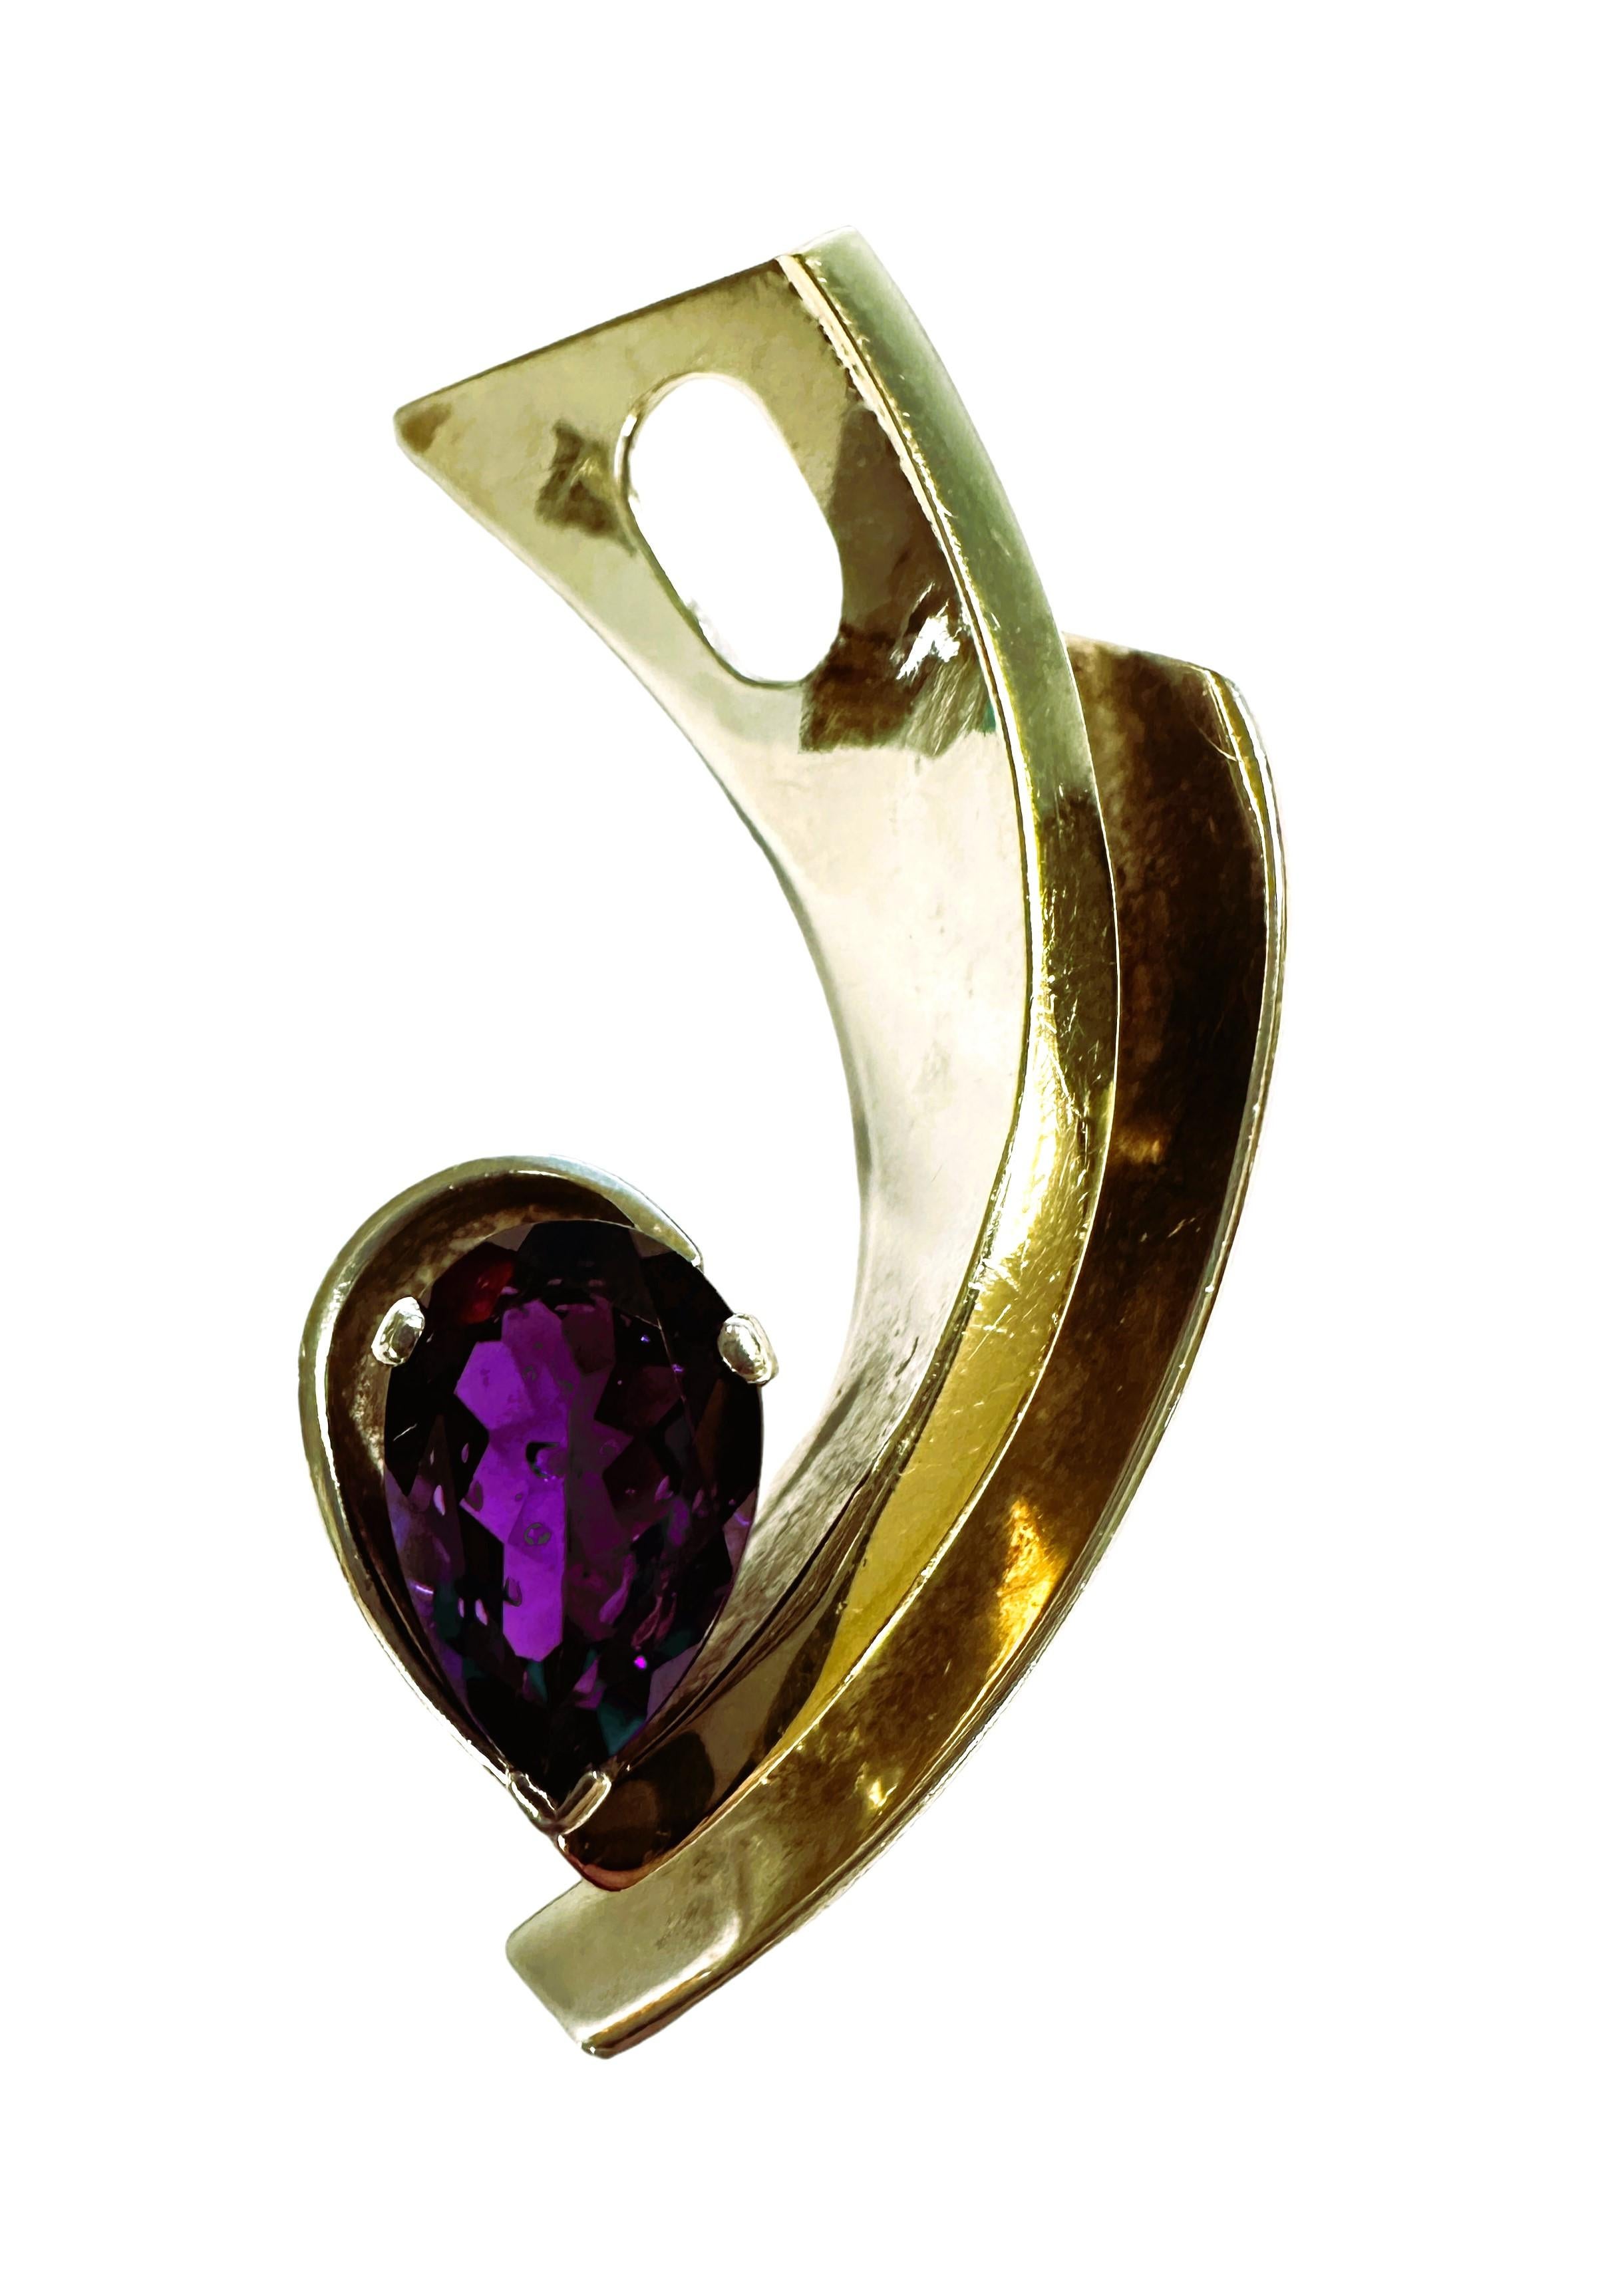 14k Gold & Sterling Silver Modernist Pendant with Purple Spinel In Excellent Condition For Sale In Eagan, MN